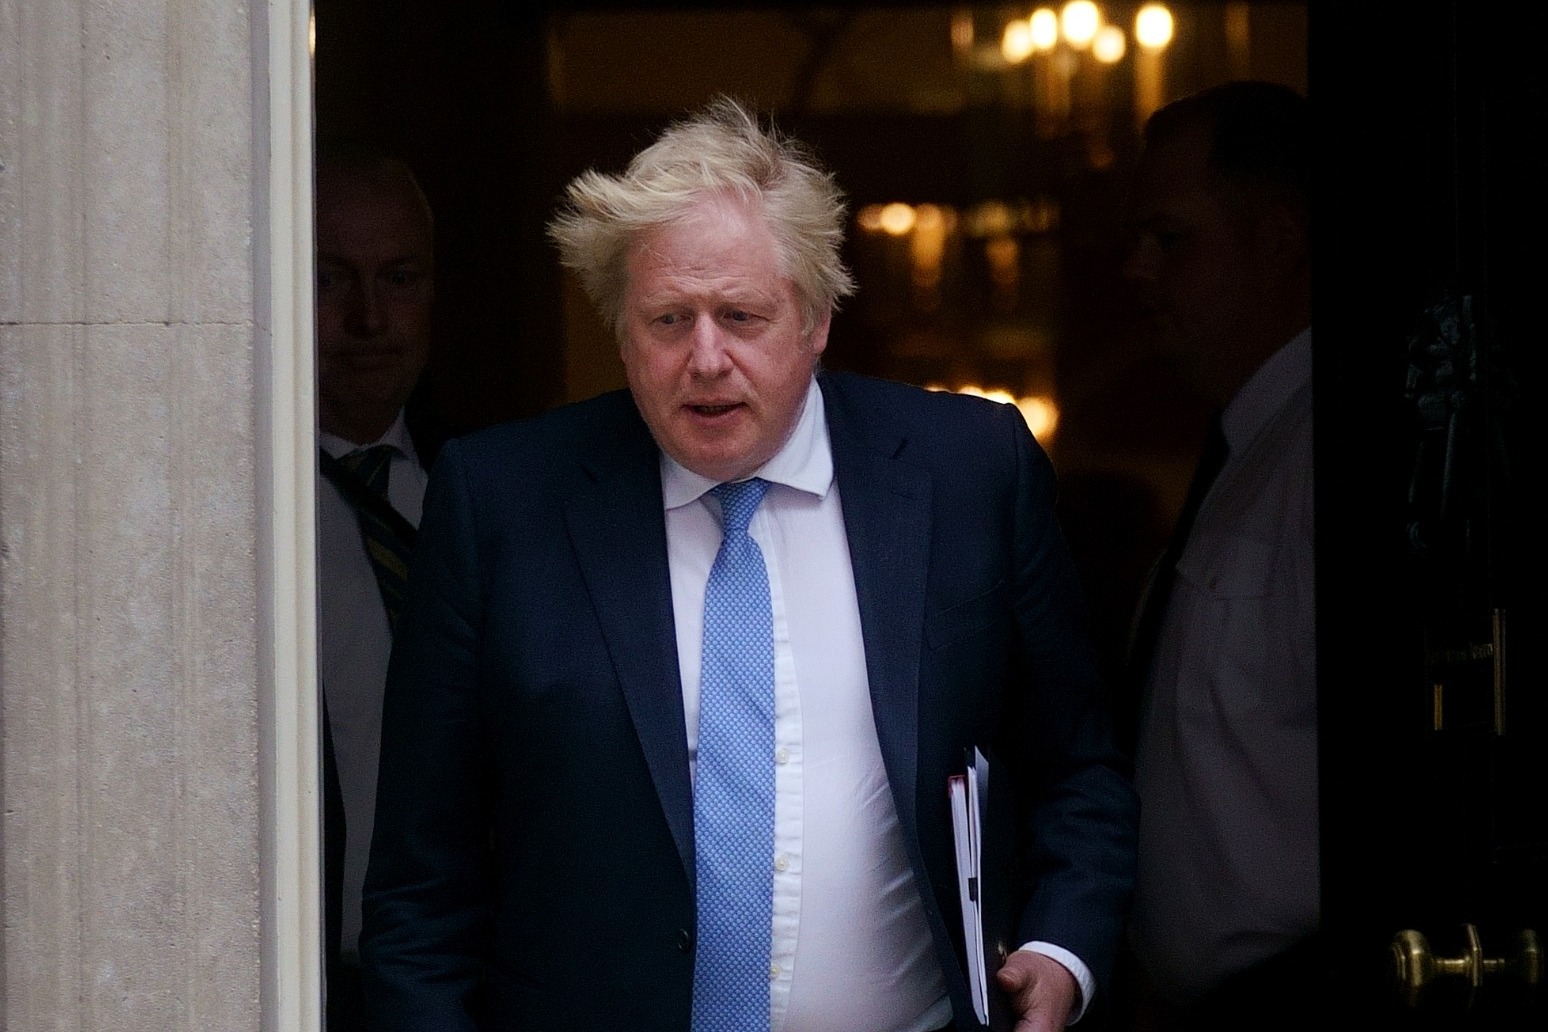 Bereaved relatives on Johnson’s apology: He’s a charlatan debasing office of PM 